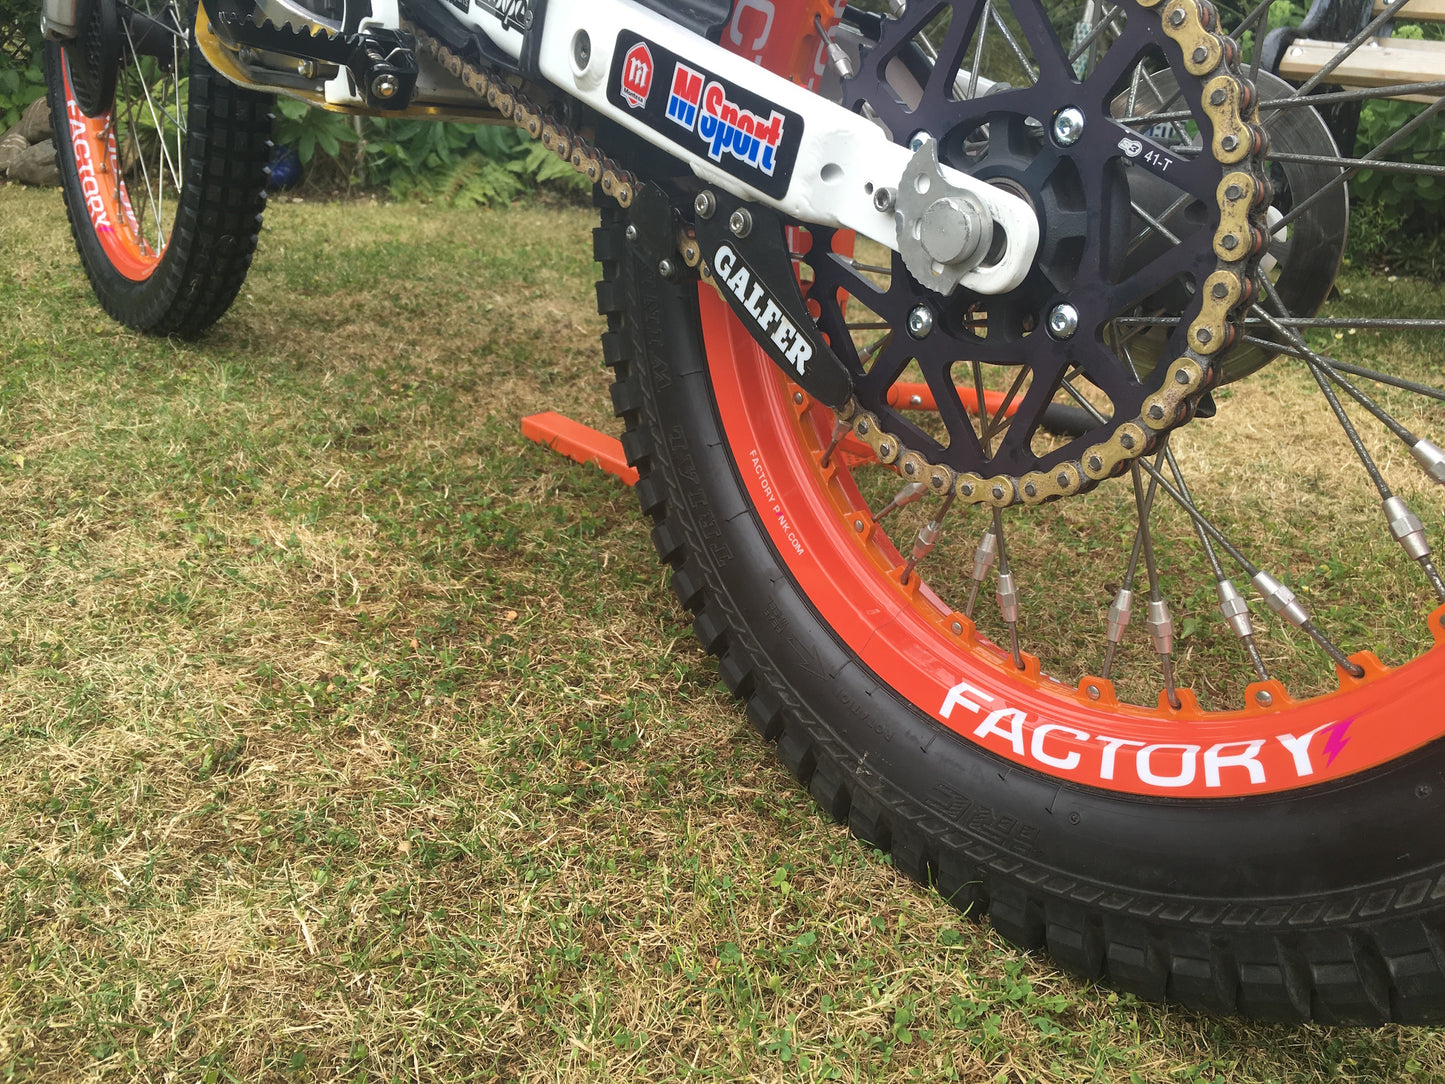 Motorcycle Trials "Bolt" Rim Protection